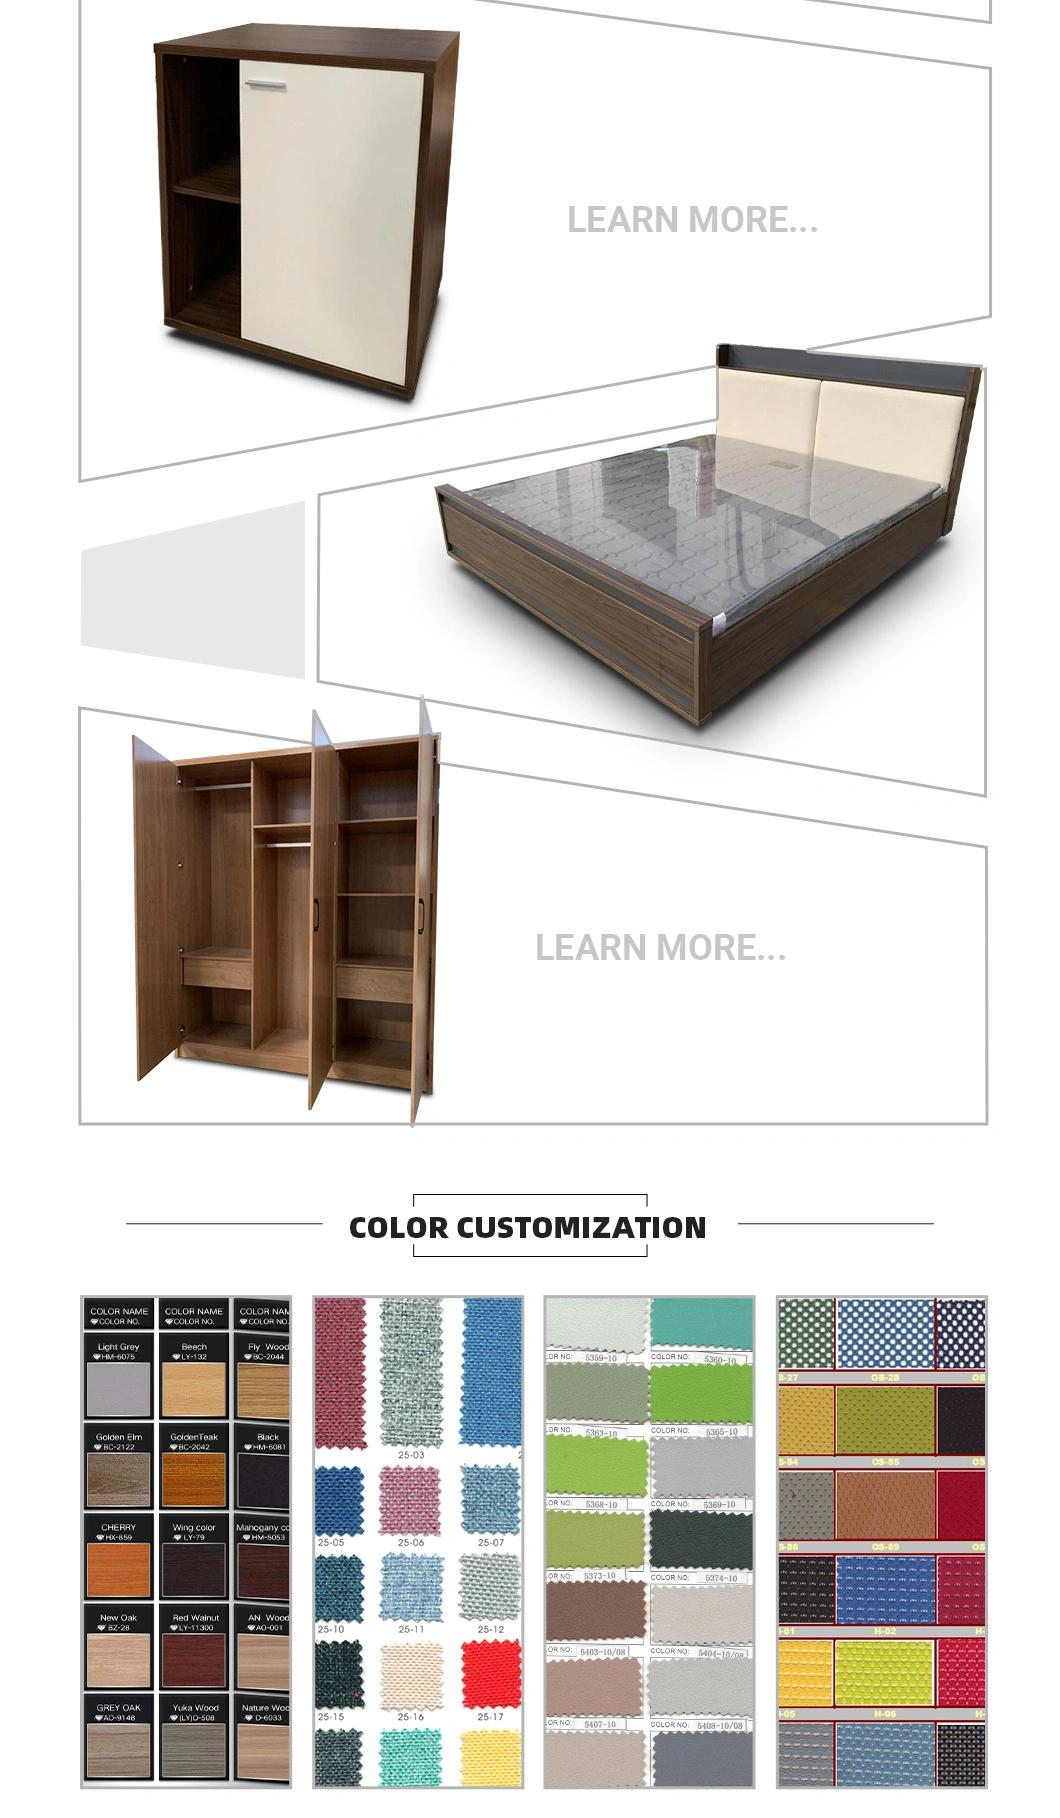 Nordic Unique Design High Quality Hotel Home Furniture Bedroom Wooden Storage Bed with Night Stand